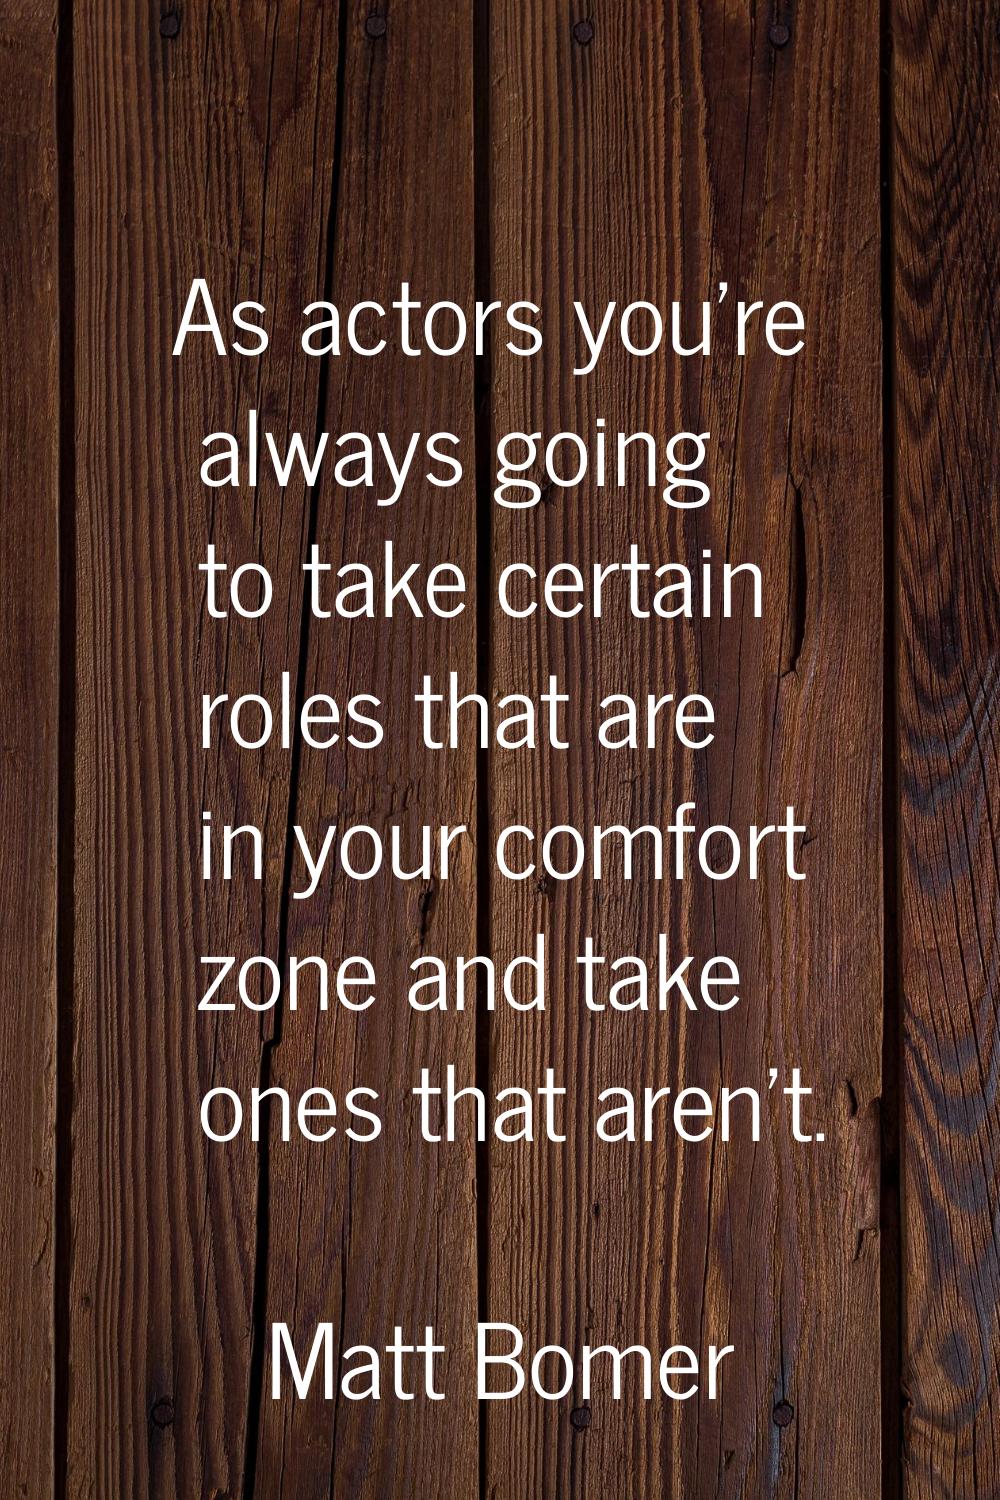 As actors you're always going to take certain roles that are in your comfort zone and take ones tha